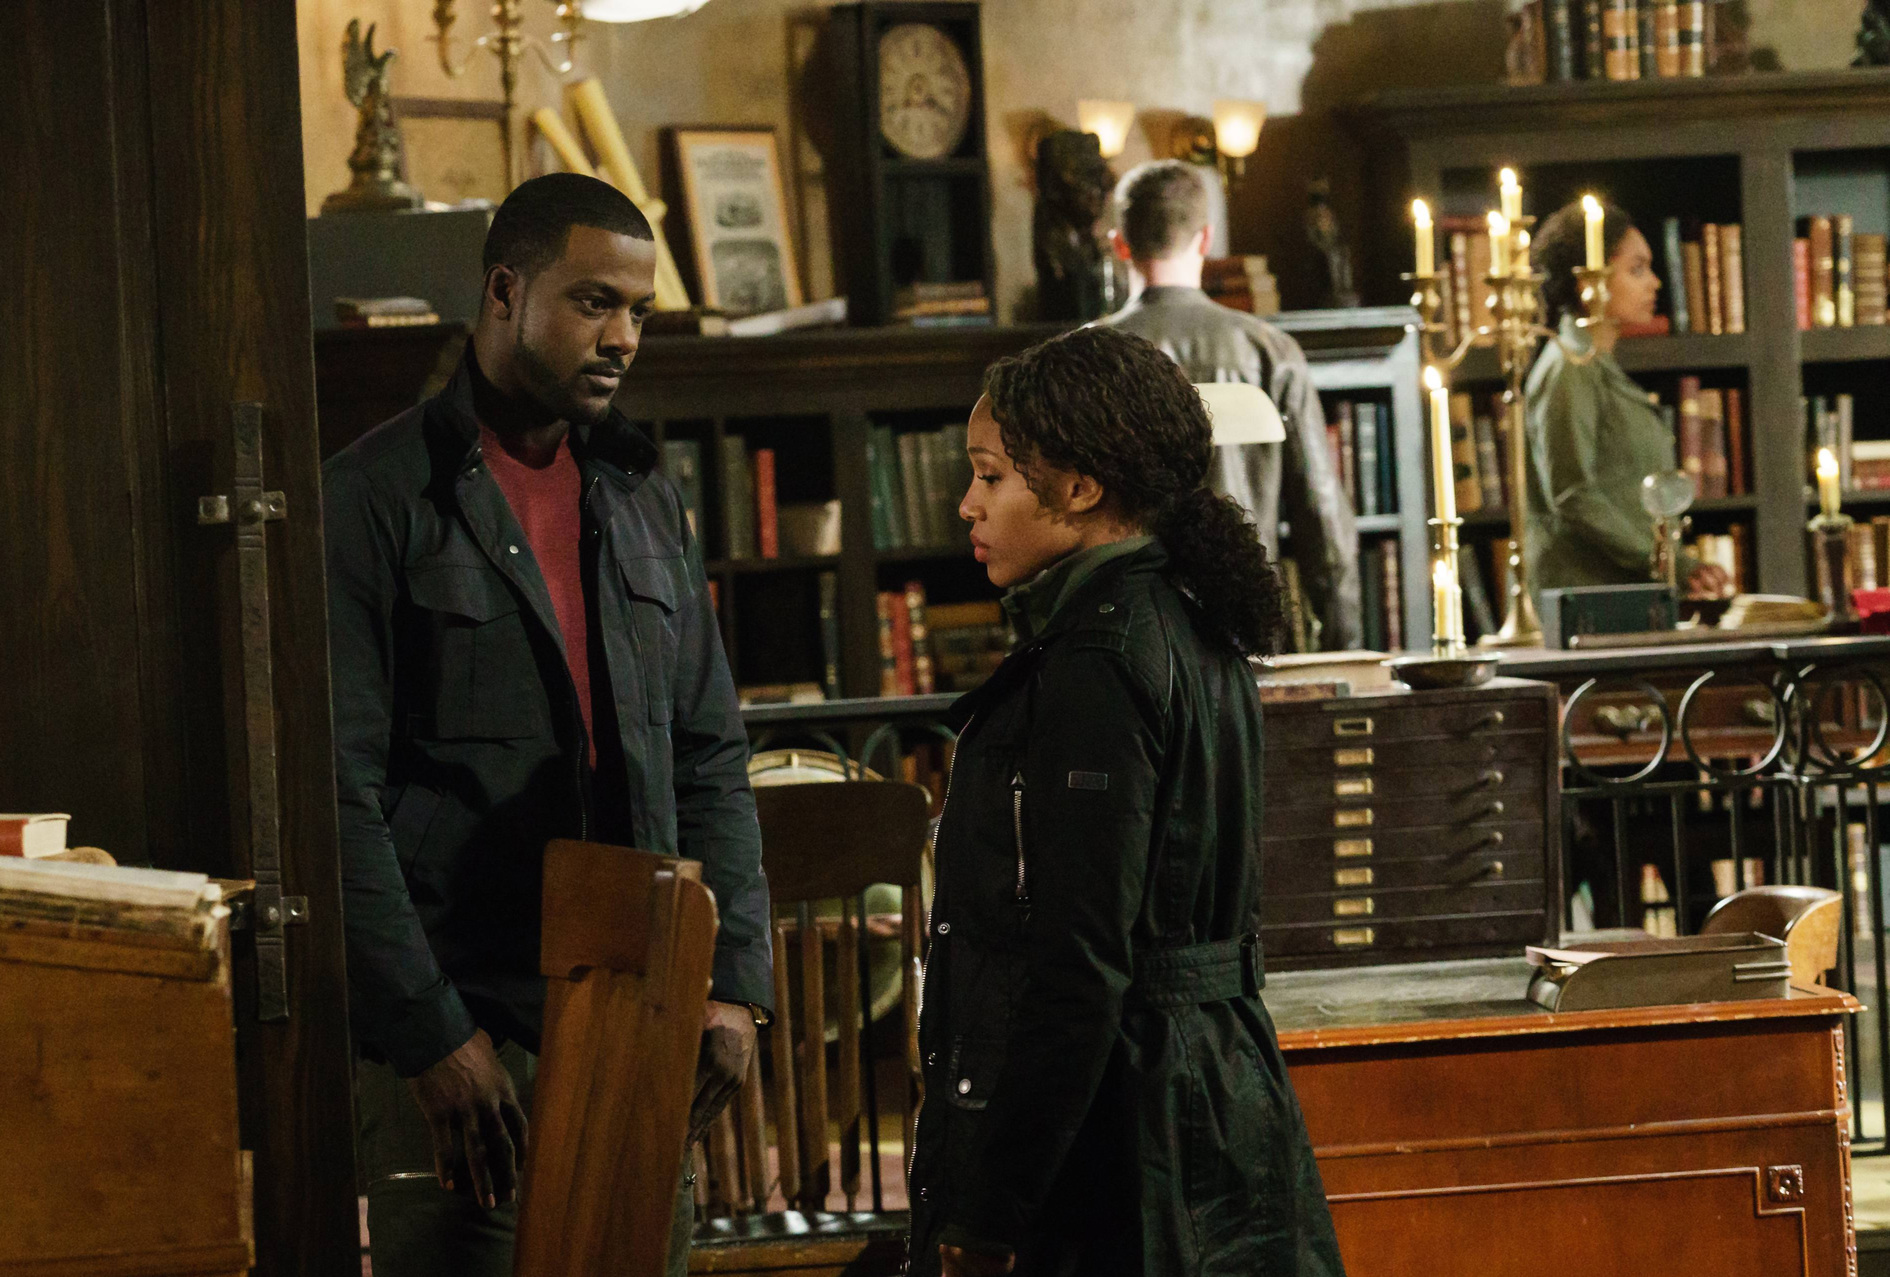 SLEEPY HOLLOW: L-R: Lance Gross and Nicole Beharie in the ÒDelawareÓ episode of SLEEPY HOLLOW airing Friday, April 1 (8:00-9:00 PM ET/PT) on FOX. ©2016 Fox Broadcasting Co. Cr: Tina Rowden/FOX